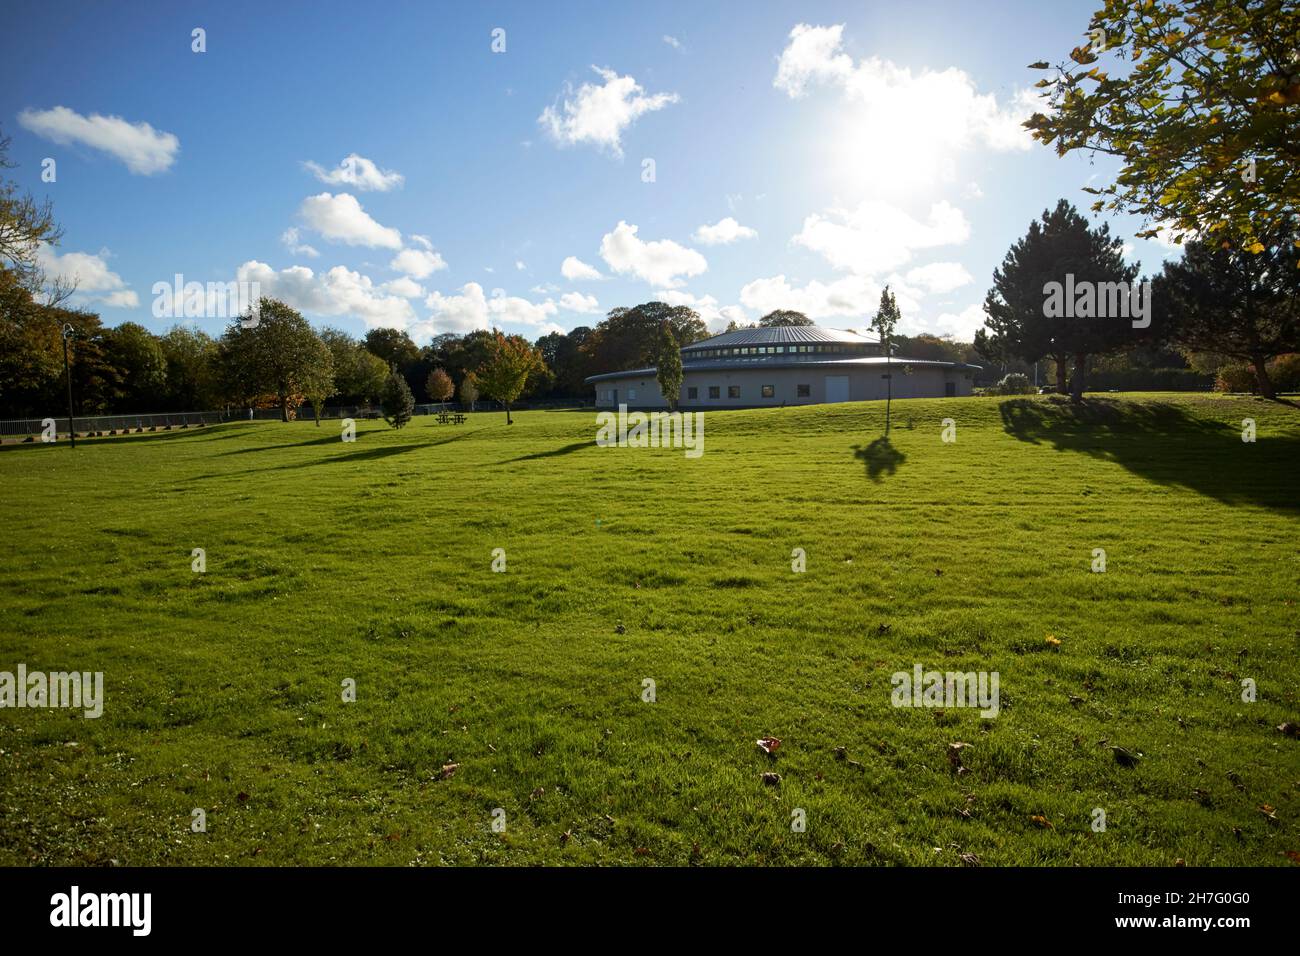 visitors centre at birkenhead park the wirrall merseyside uk Stock Photo